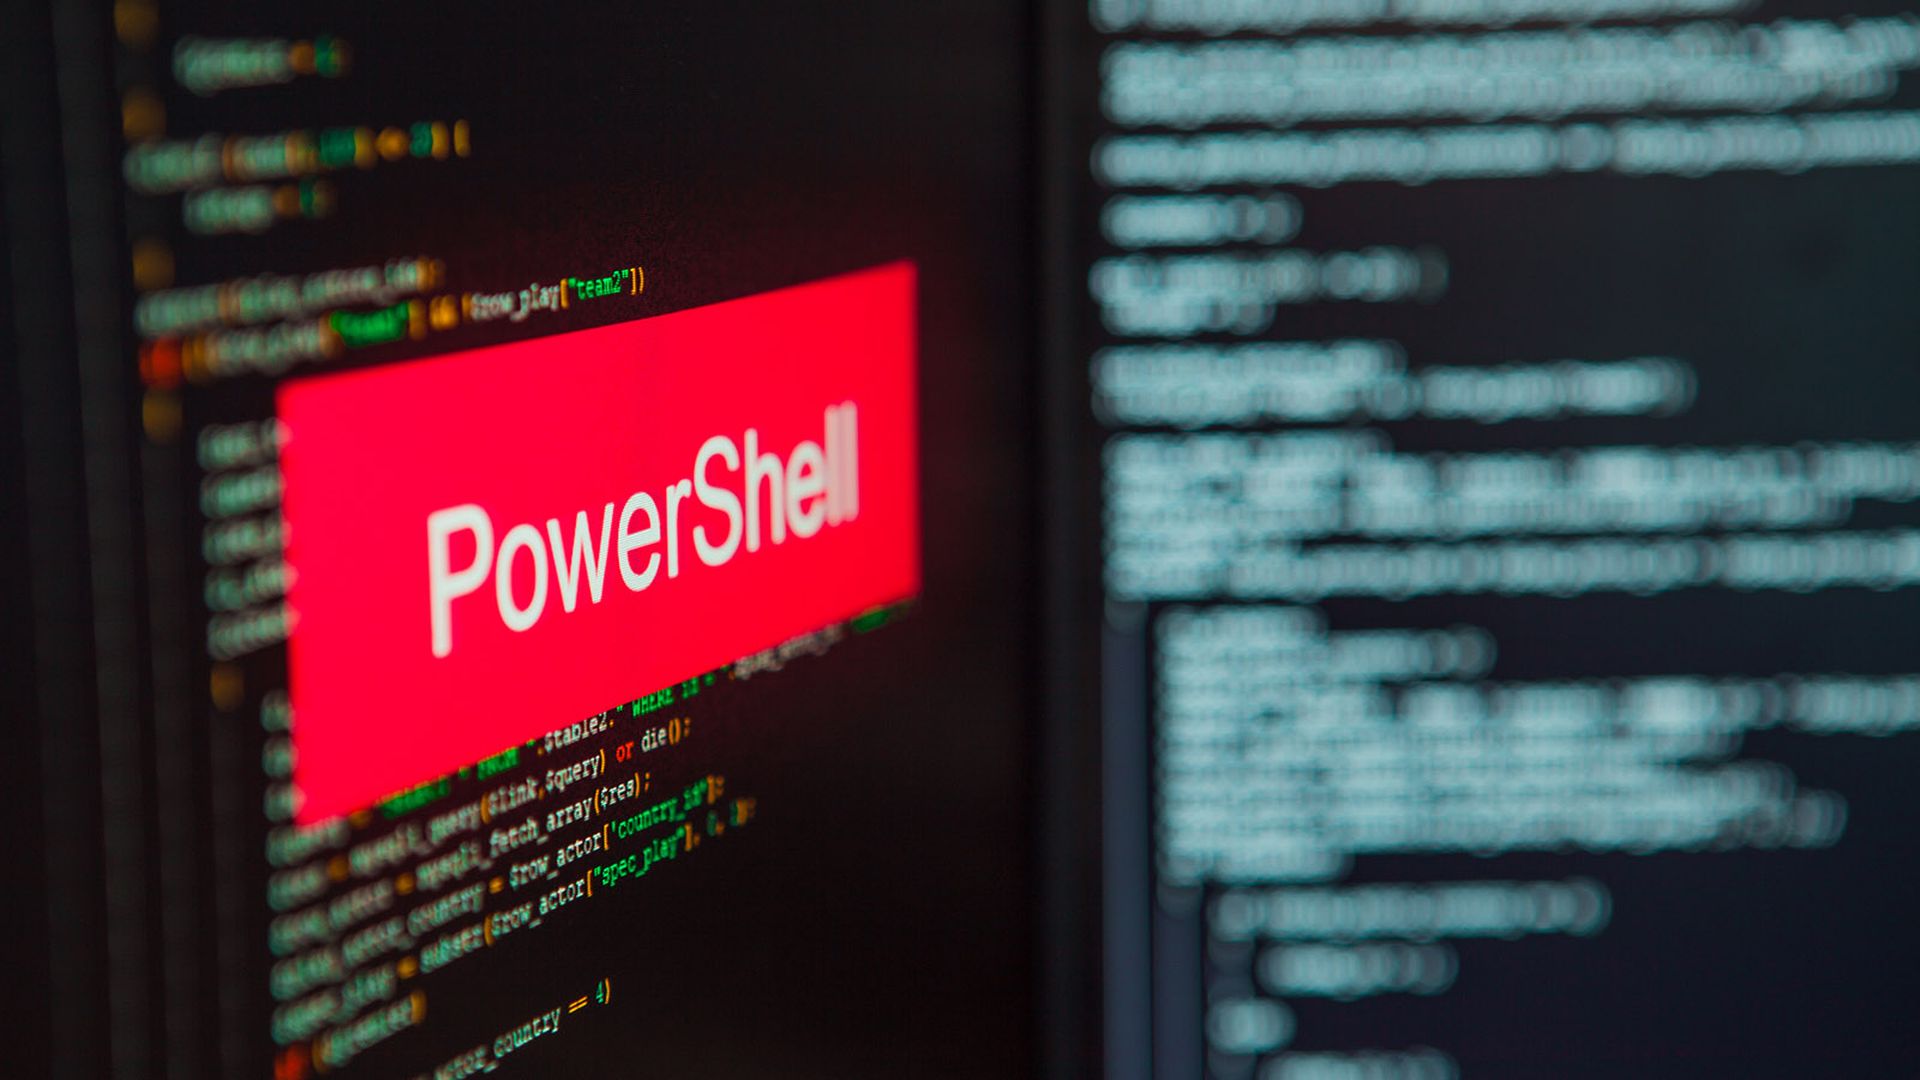 PowerShell inscription on the background of computer code.